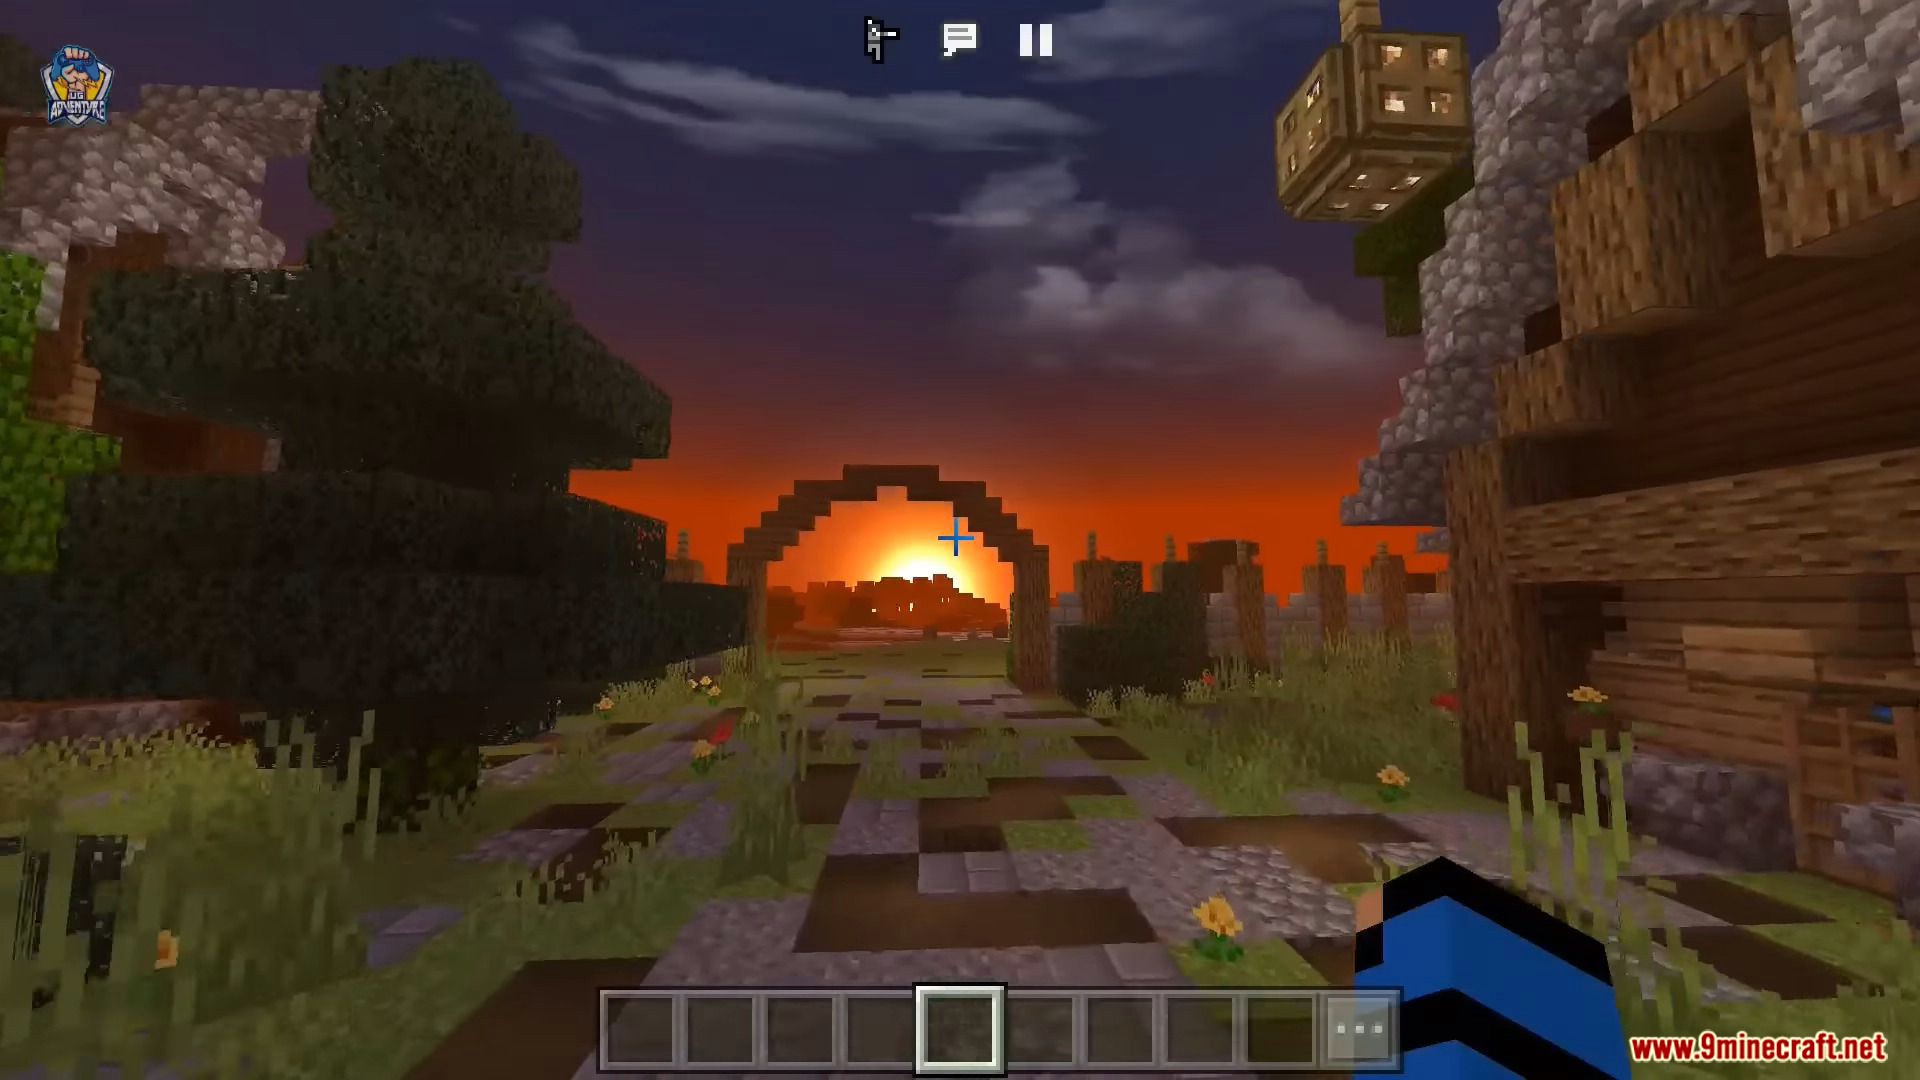 BGRD Shaders (1.19, 1.18) - No Lag Support Render Dragon 8